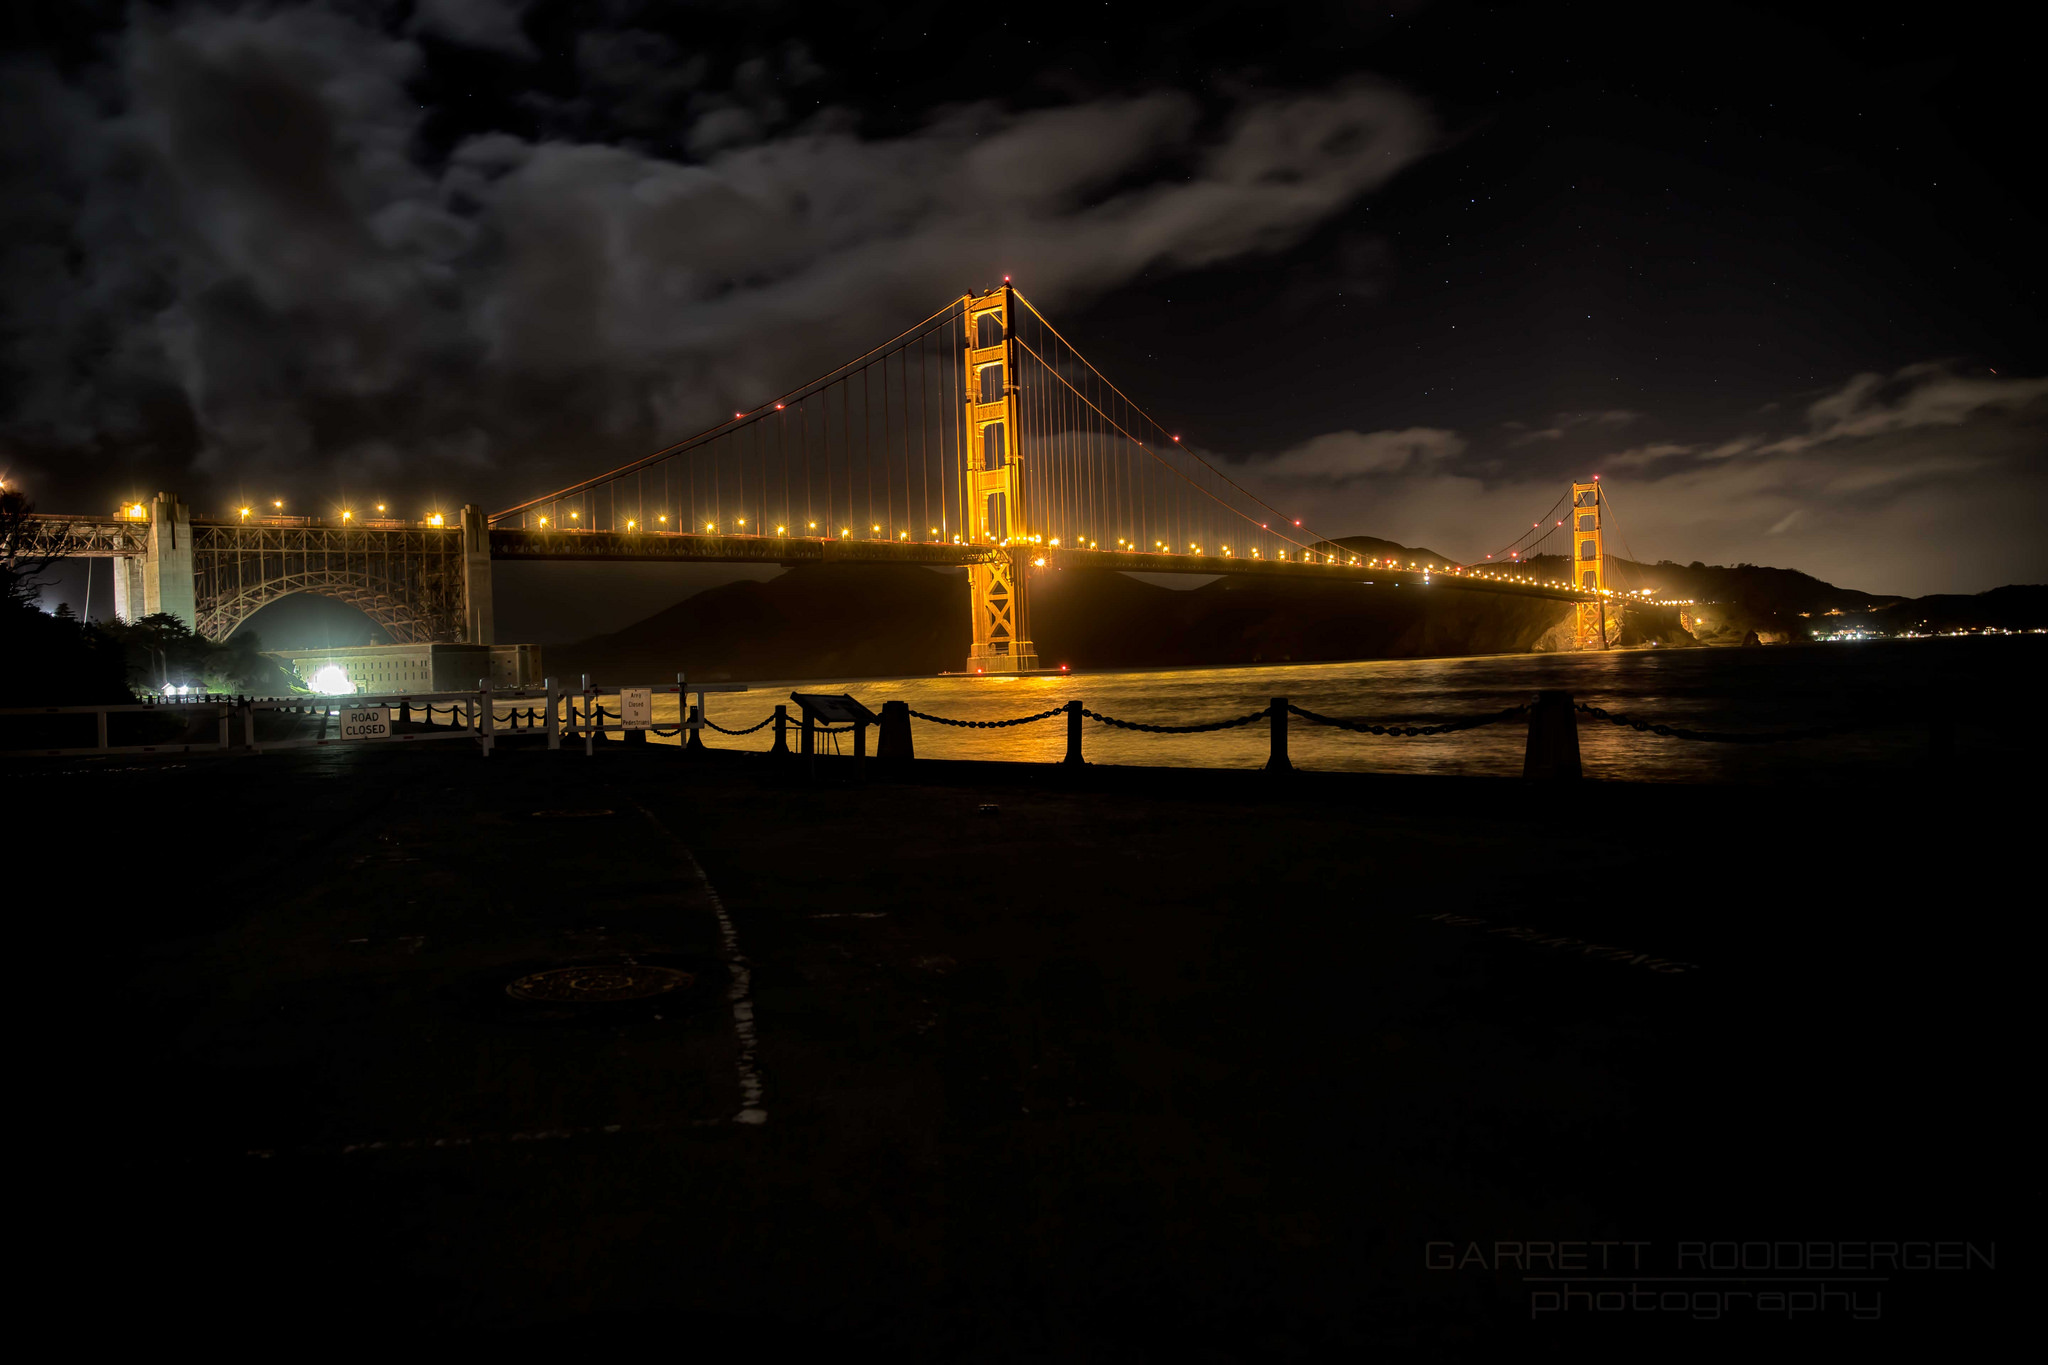 Golden Gate @night #photography #photographyislife #nightsky #water #gold #goldengate #goldwater #bridge #bay #sanfrancisco #travel #seetheworld #vacation #work #night #light #reflection #reflections #life #seek #see #distract #find #view